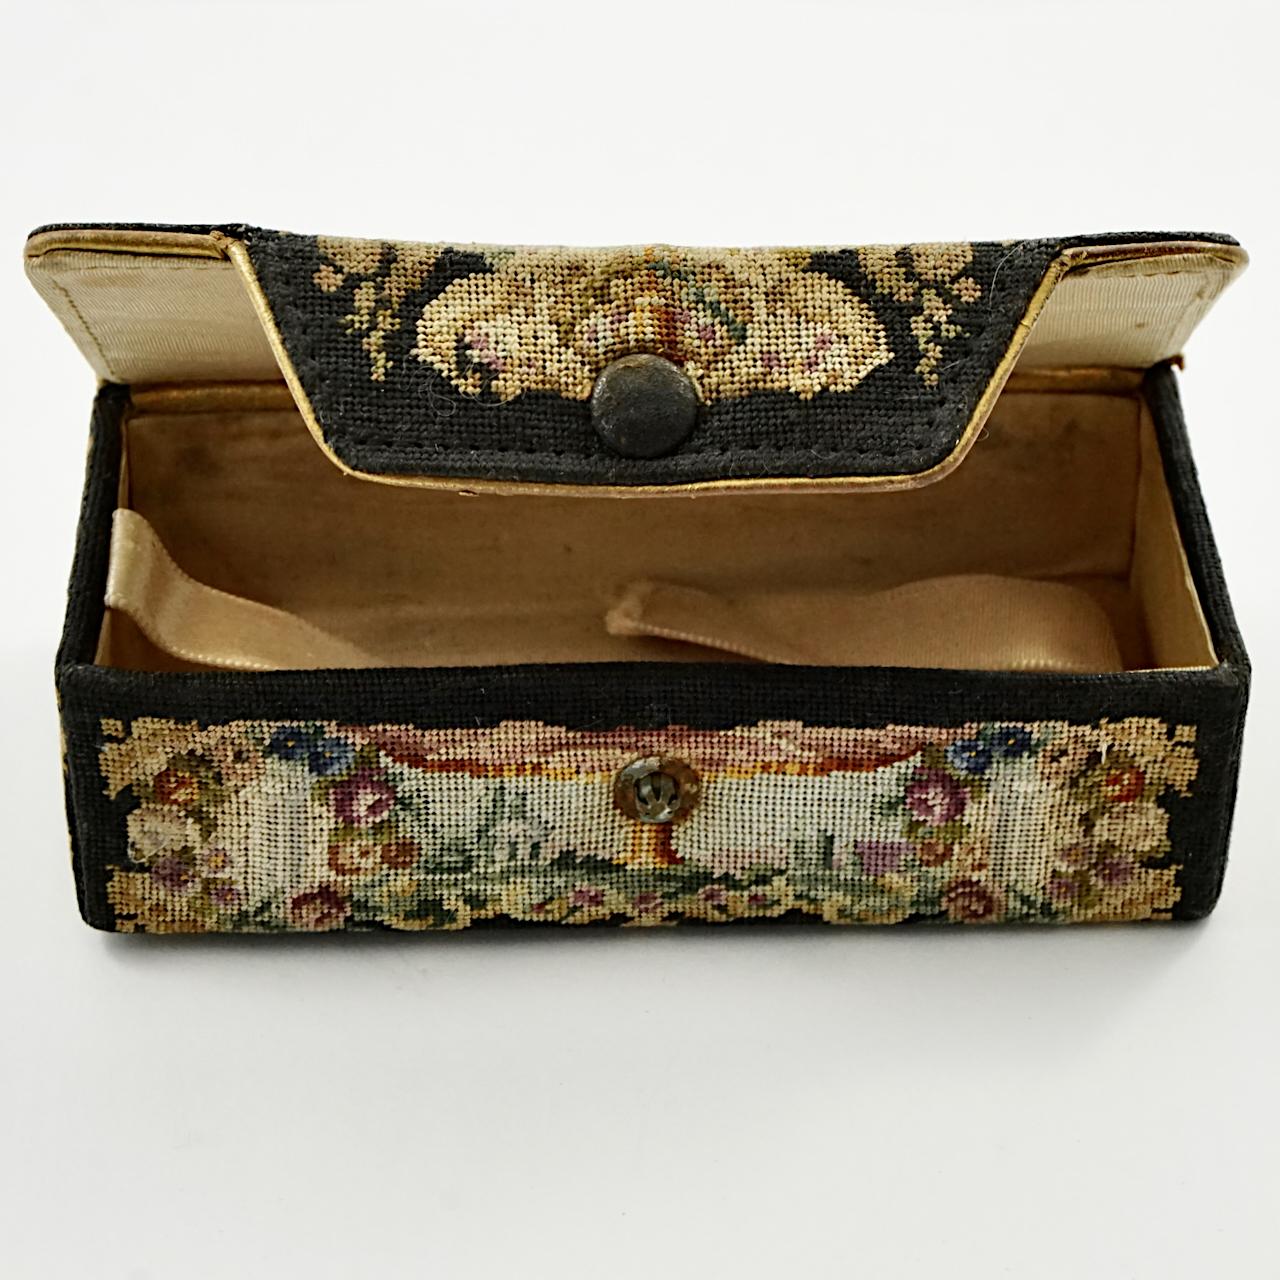 Petit Point Opera Glasses in a Petit Point Case with Gold Leather Moiré Lining 8